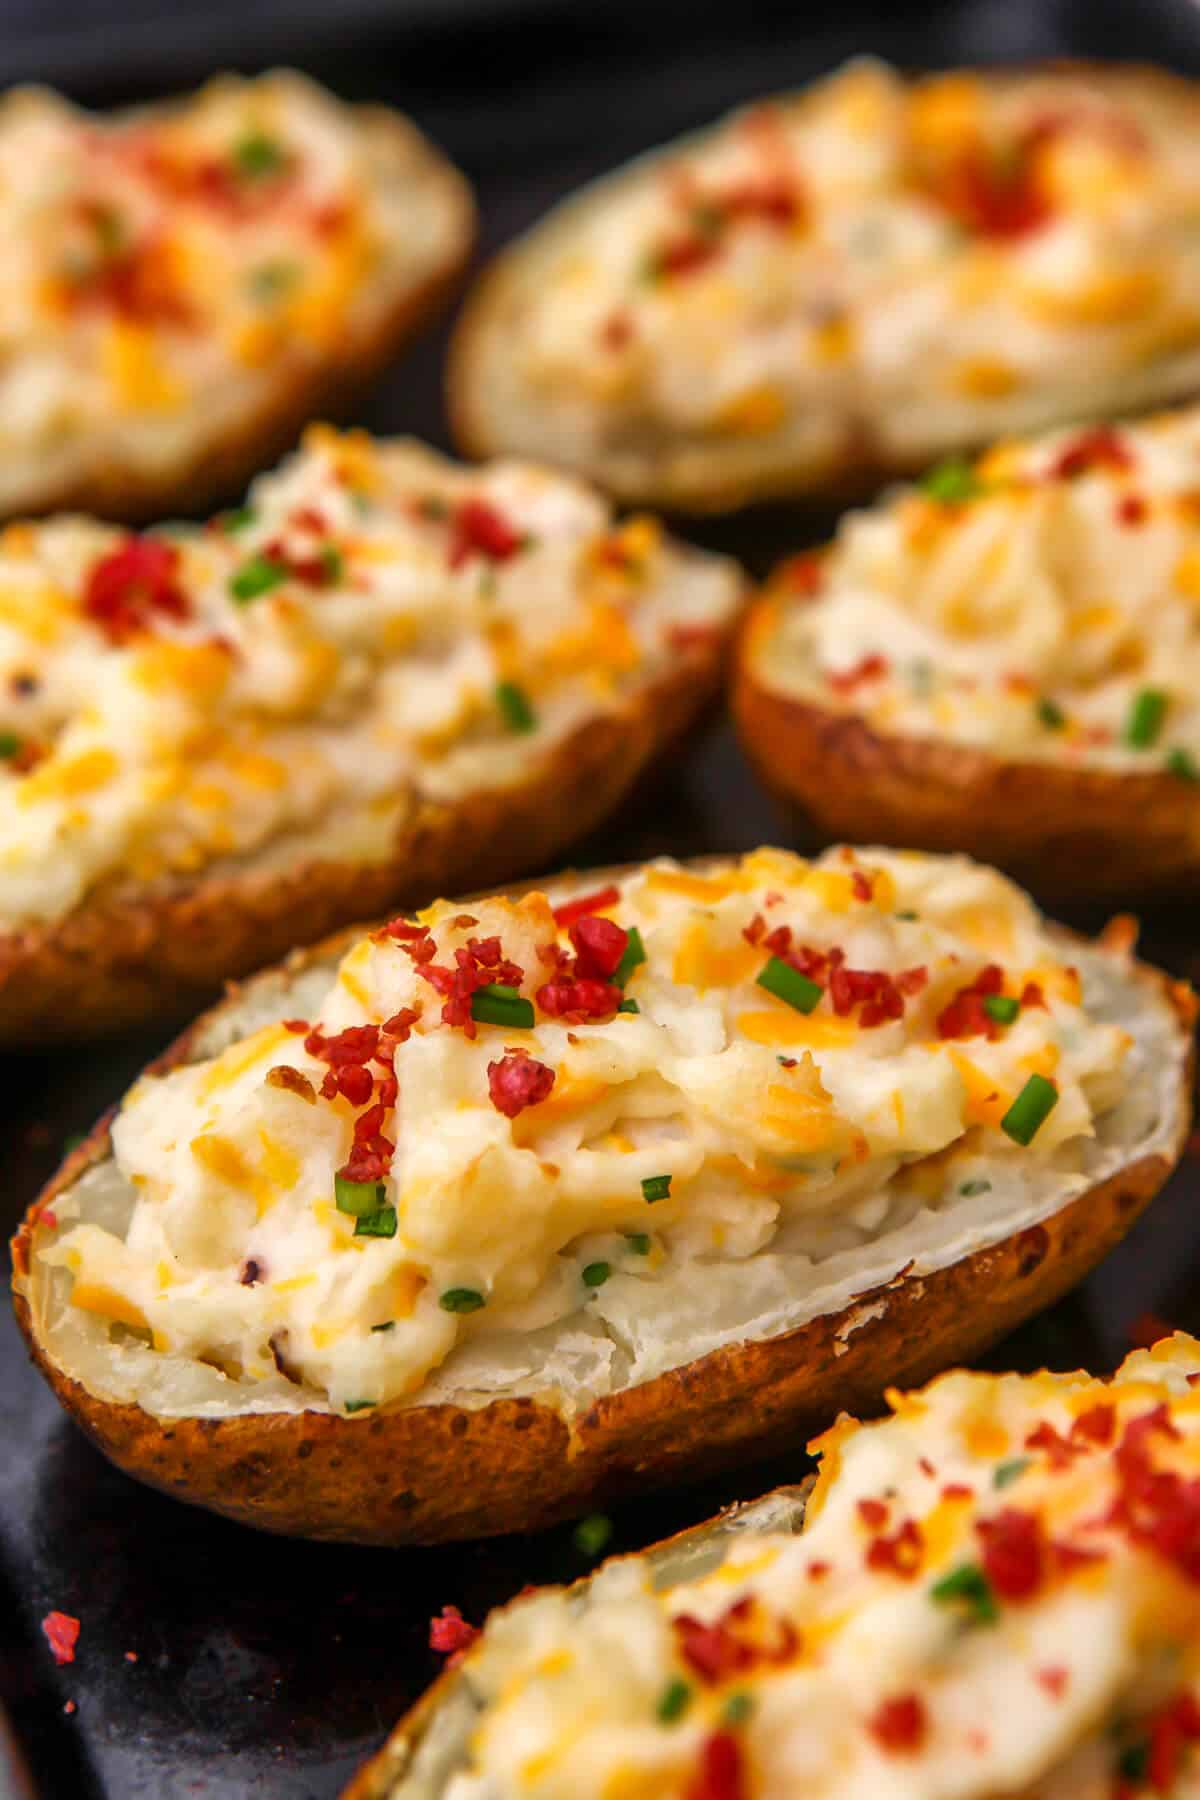 Vegan twice baked potatoes on a baking tray topped with bacon bits, cheese, and chives.